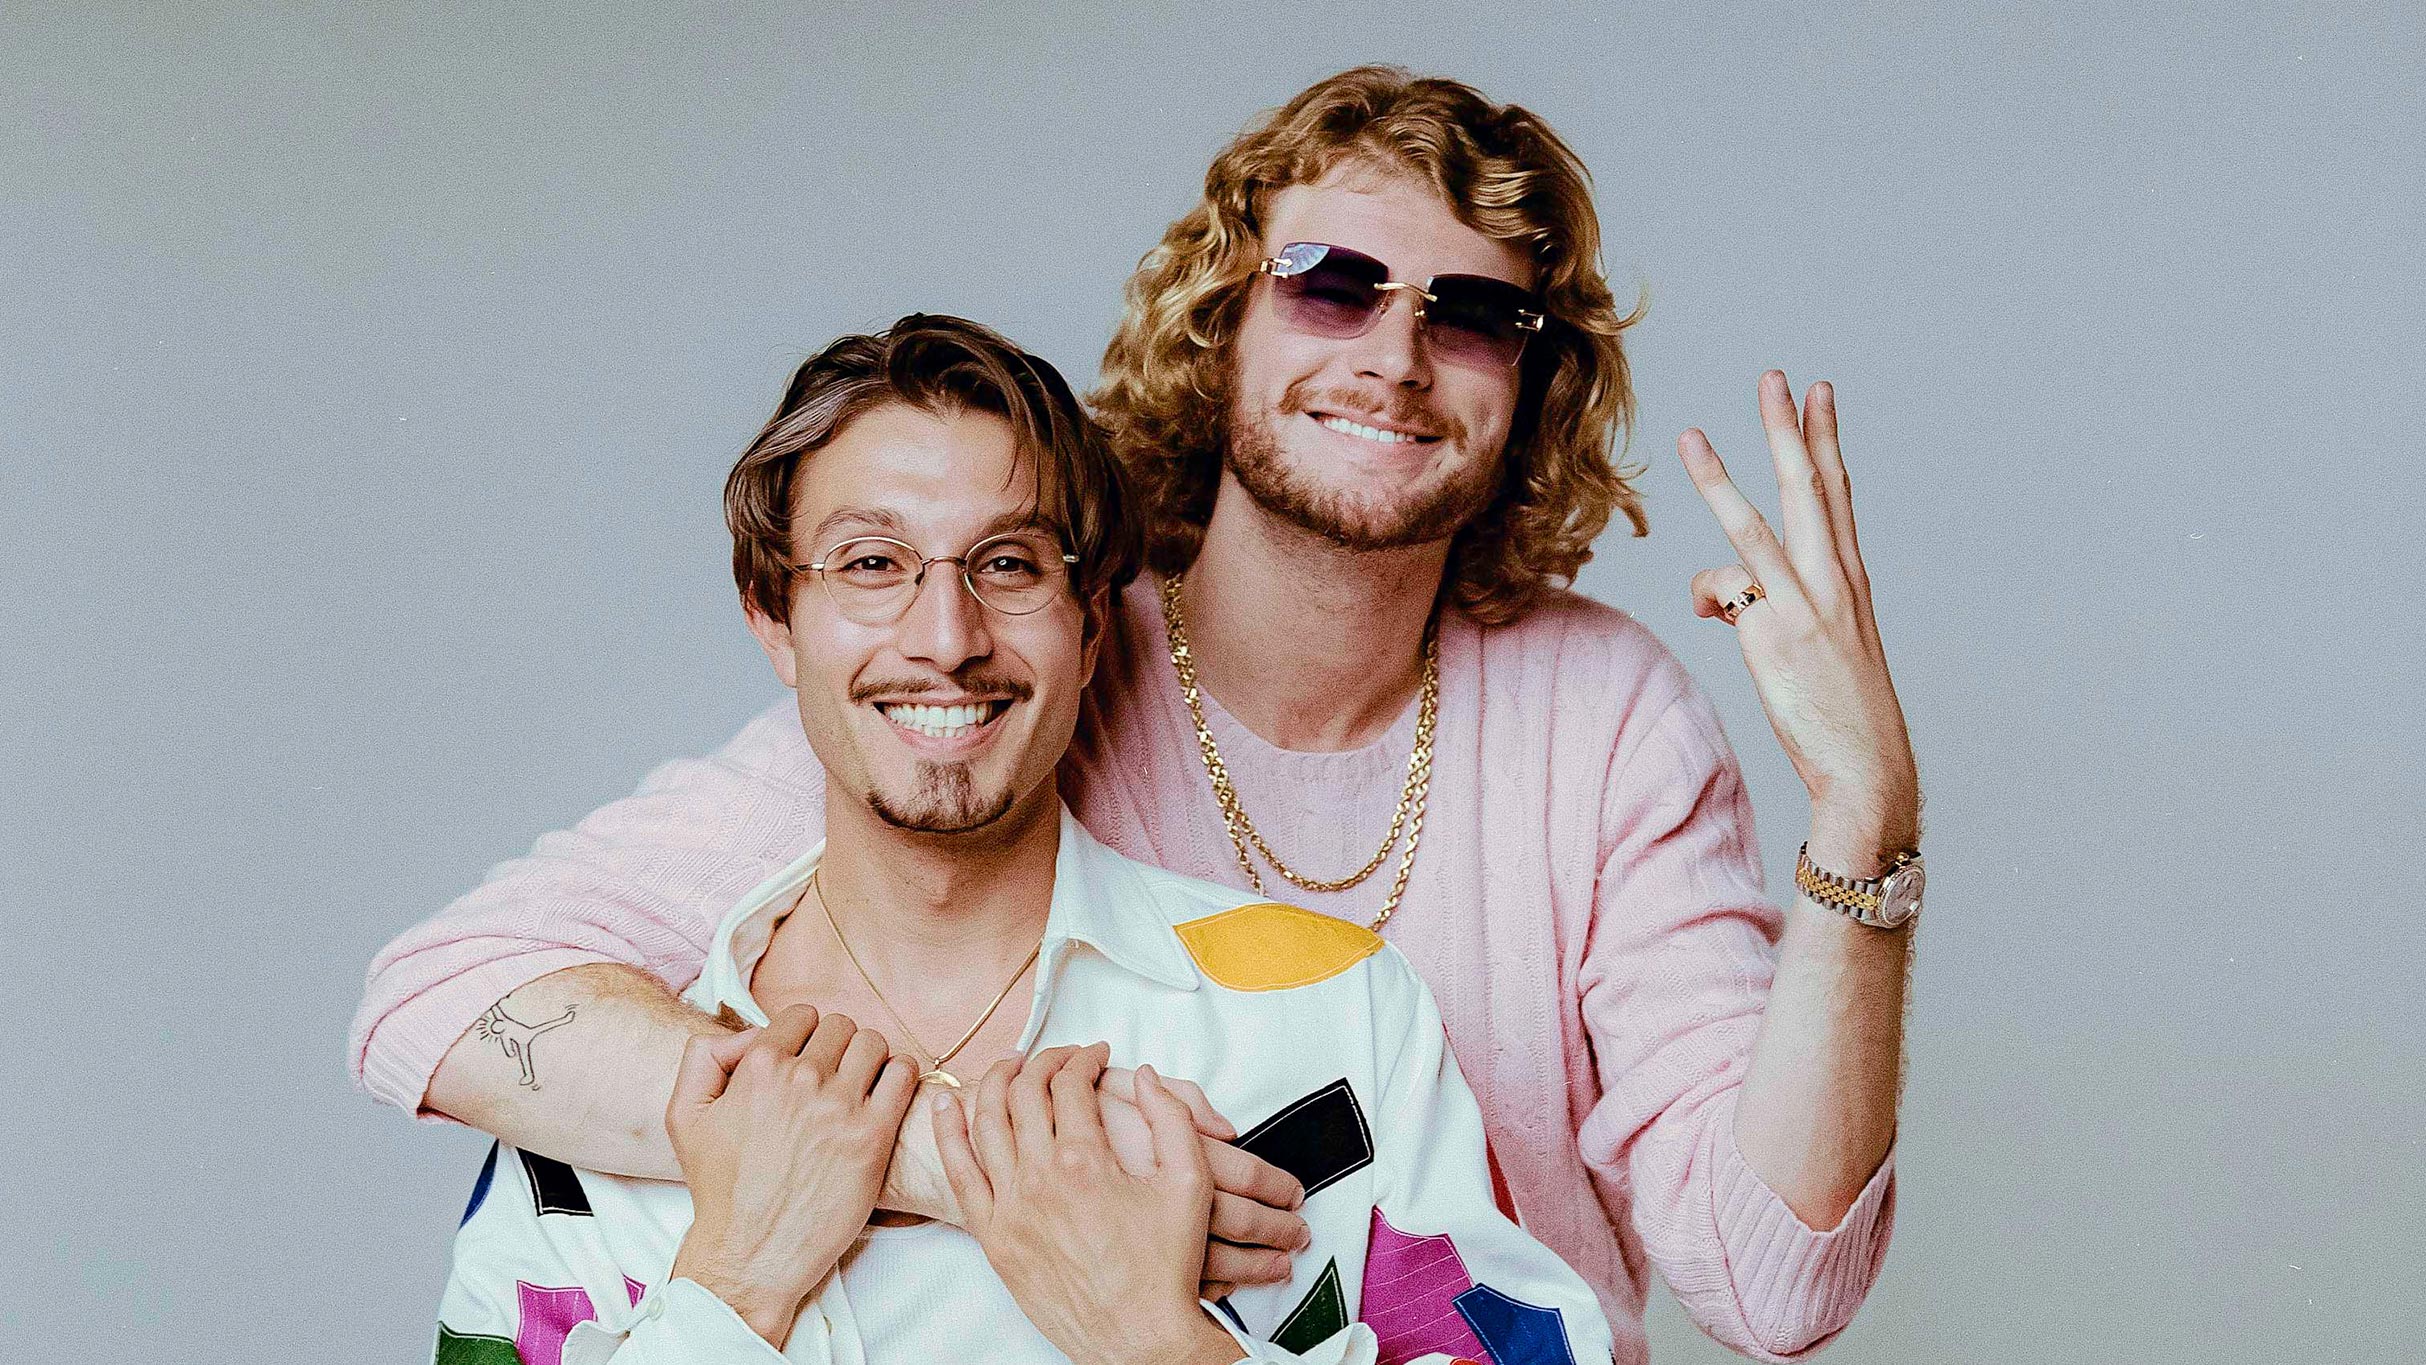 Baby Gravy (Yung Gravy & bbno$) in Auckland promo photo for Exclusive presale offer code